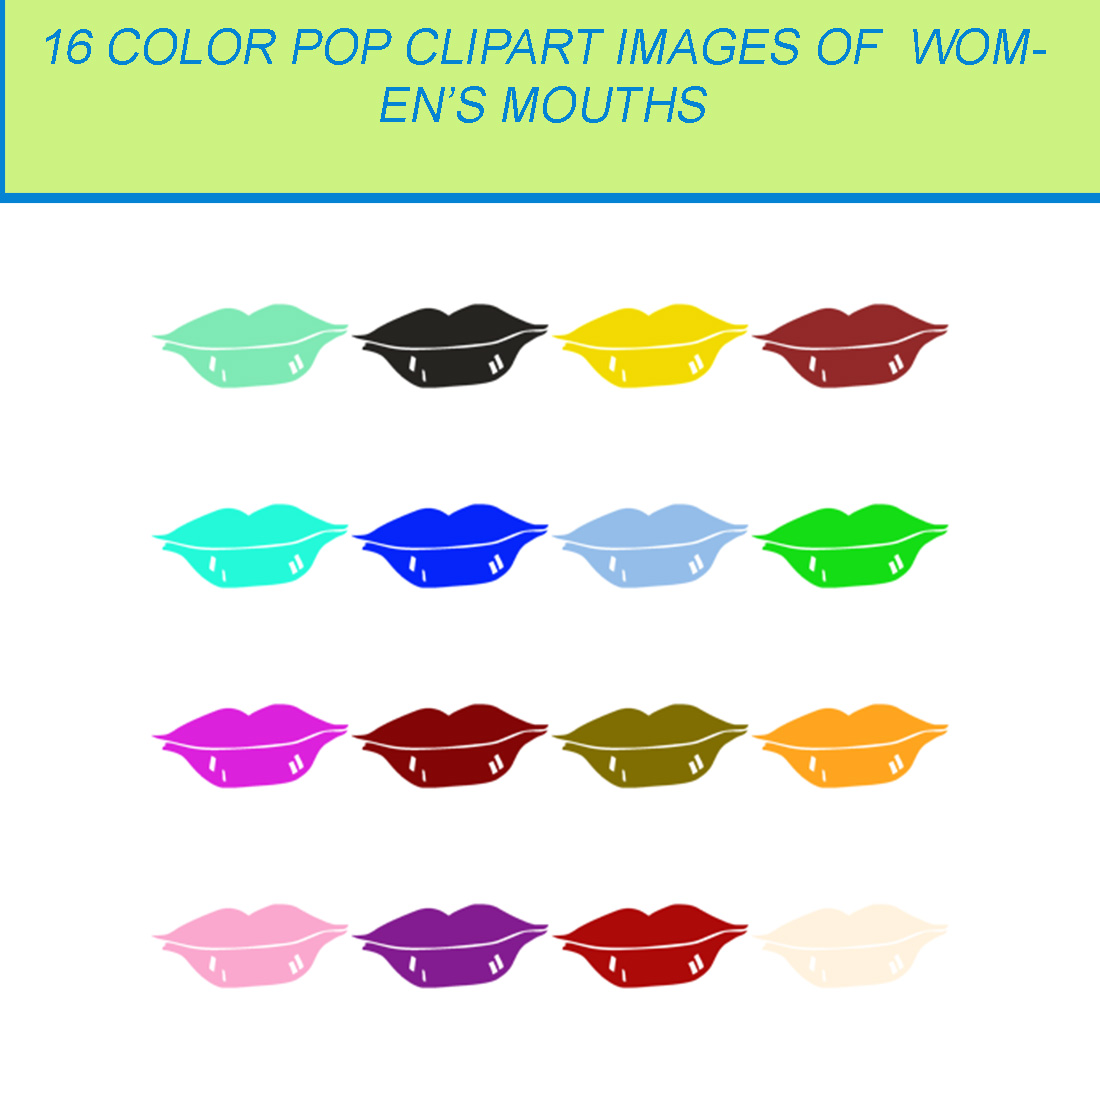 16 COLOR POP CLIPART IMAGES OF MOUTH OF WOMAN cover image.